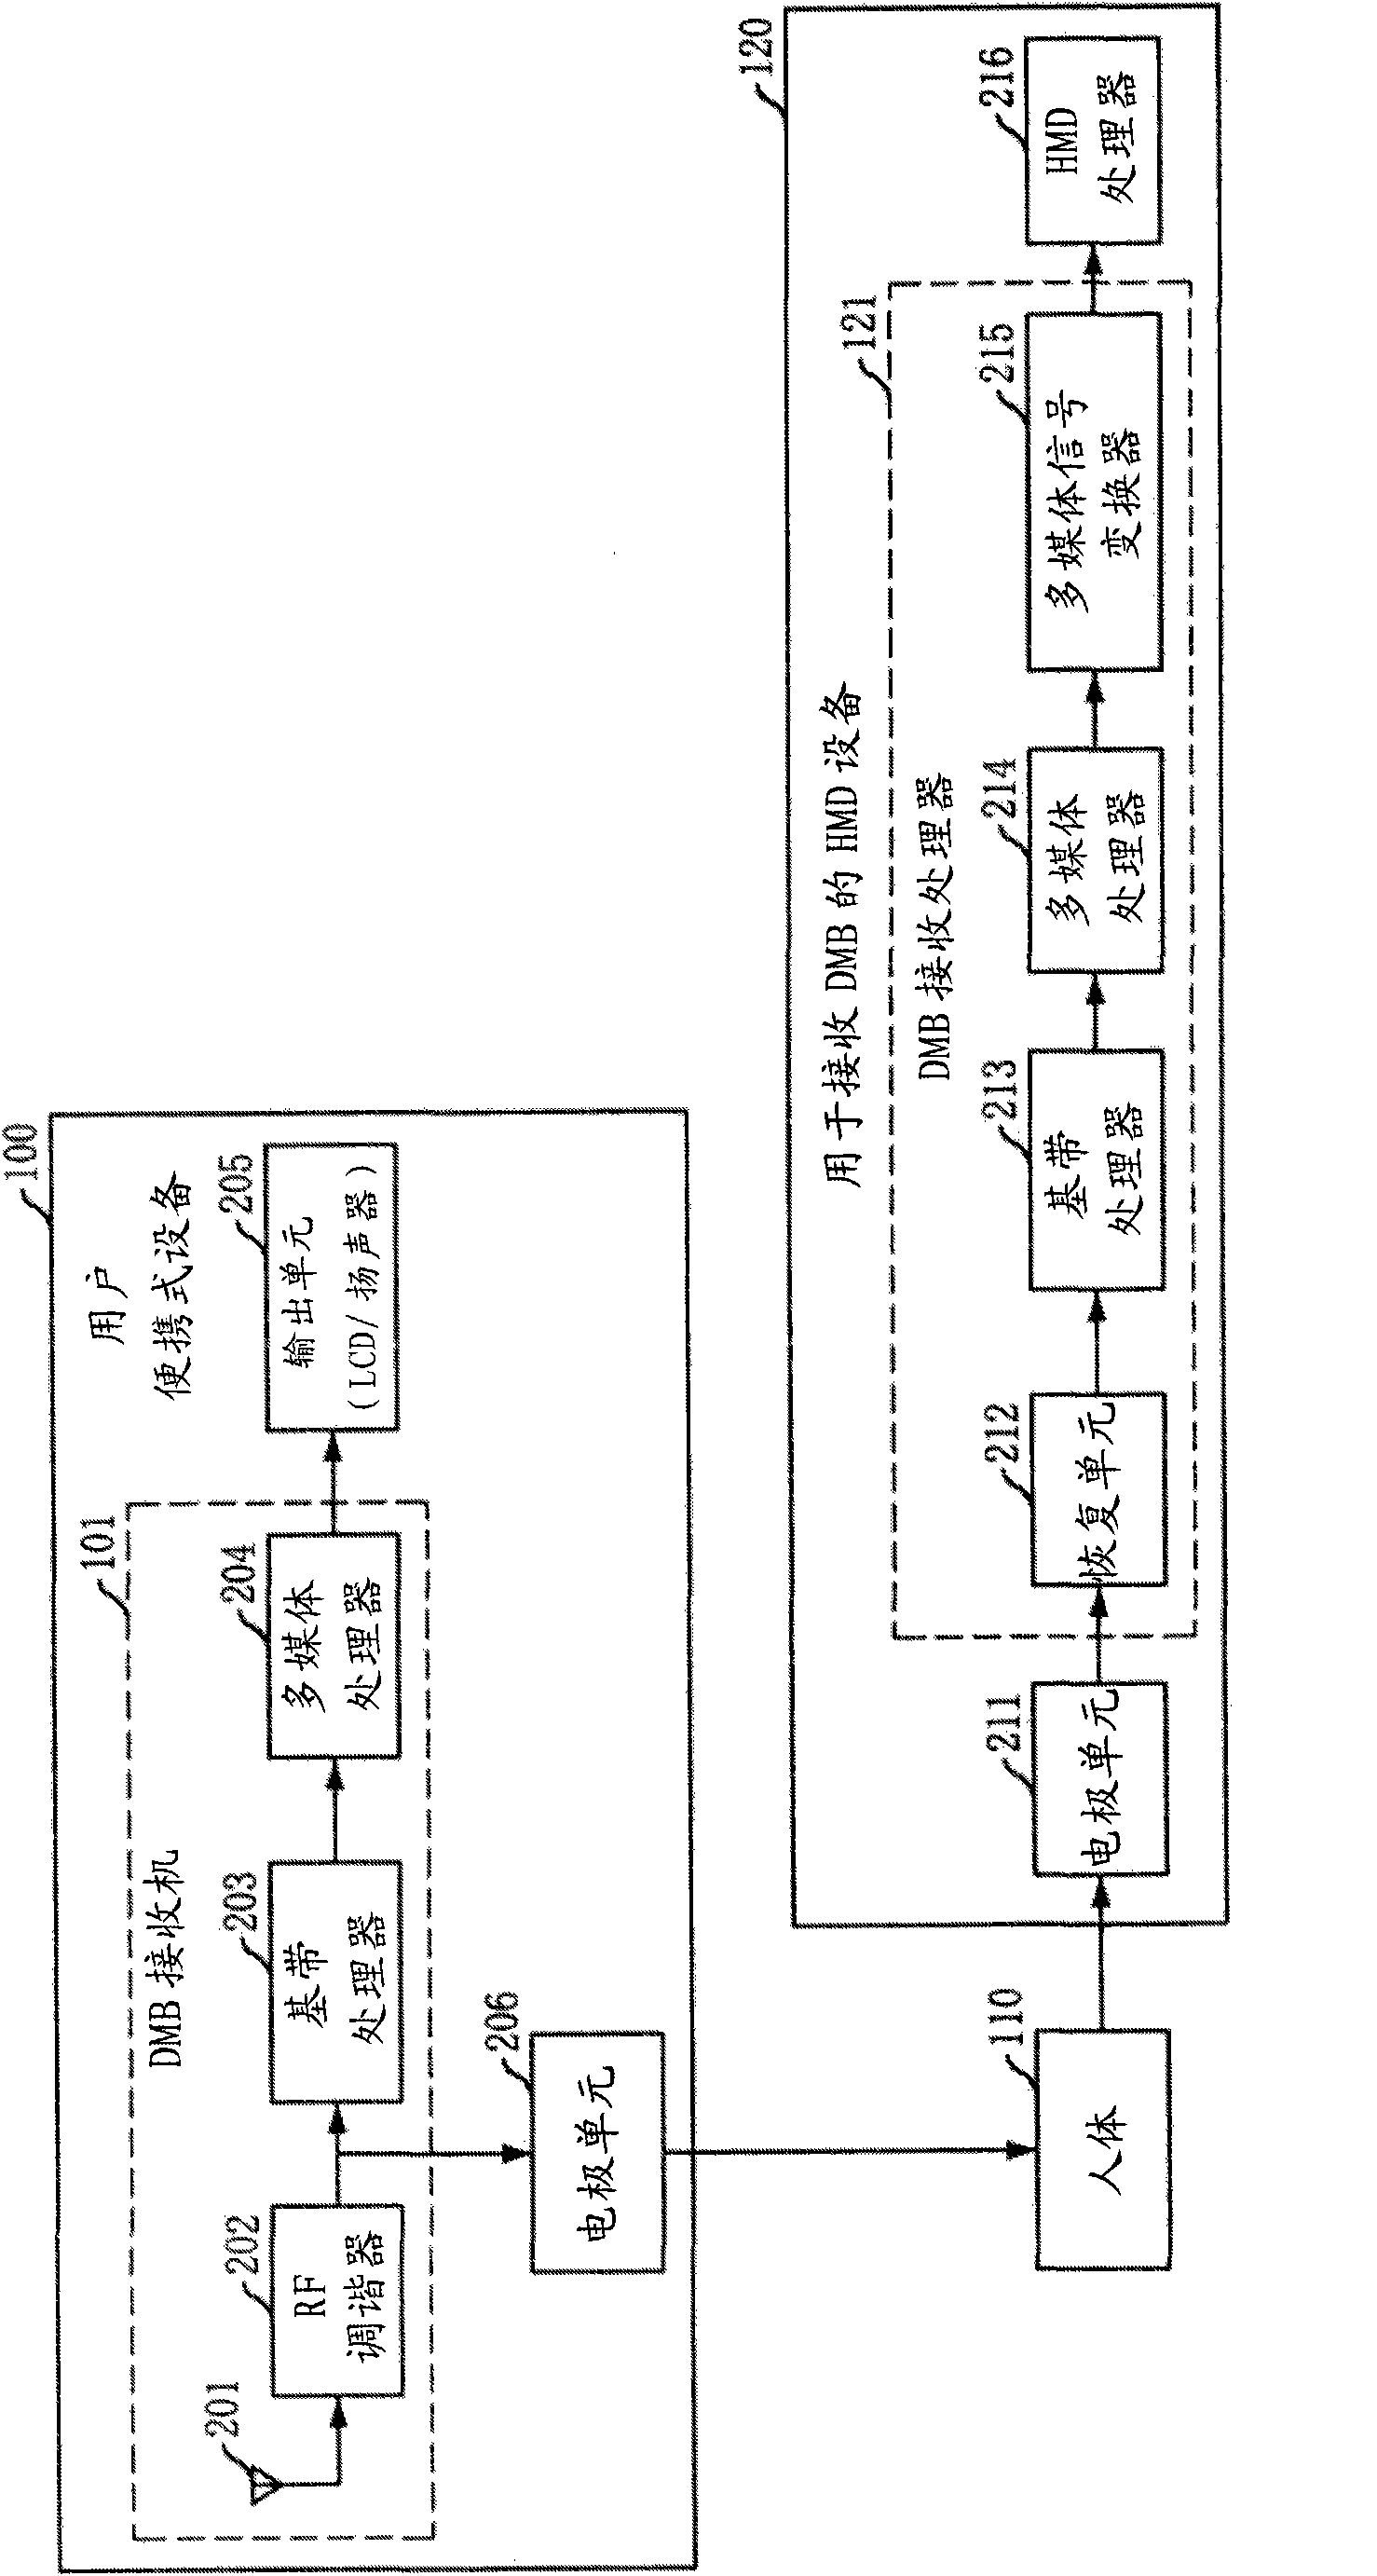 Dmb receiving portable terminal for human body communication, dmb transmitting method thereof, and hmd apparatus and method for dmb reception using human body communication